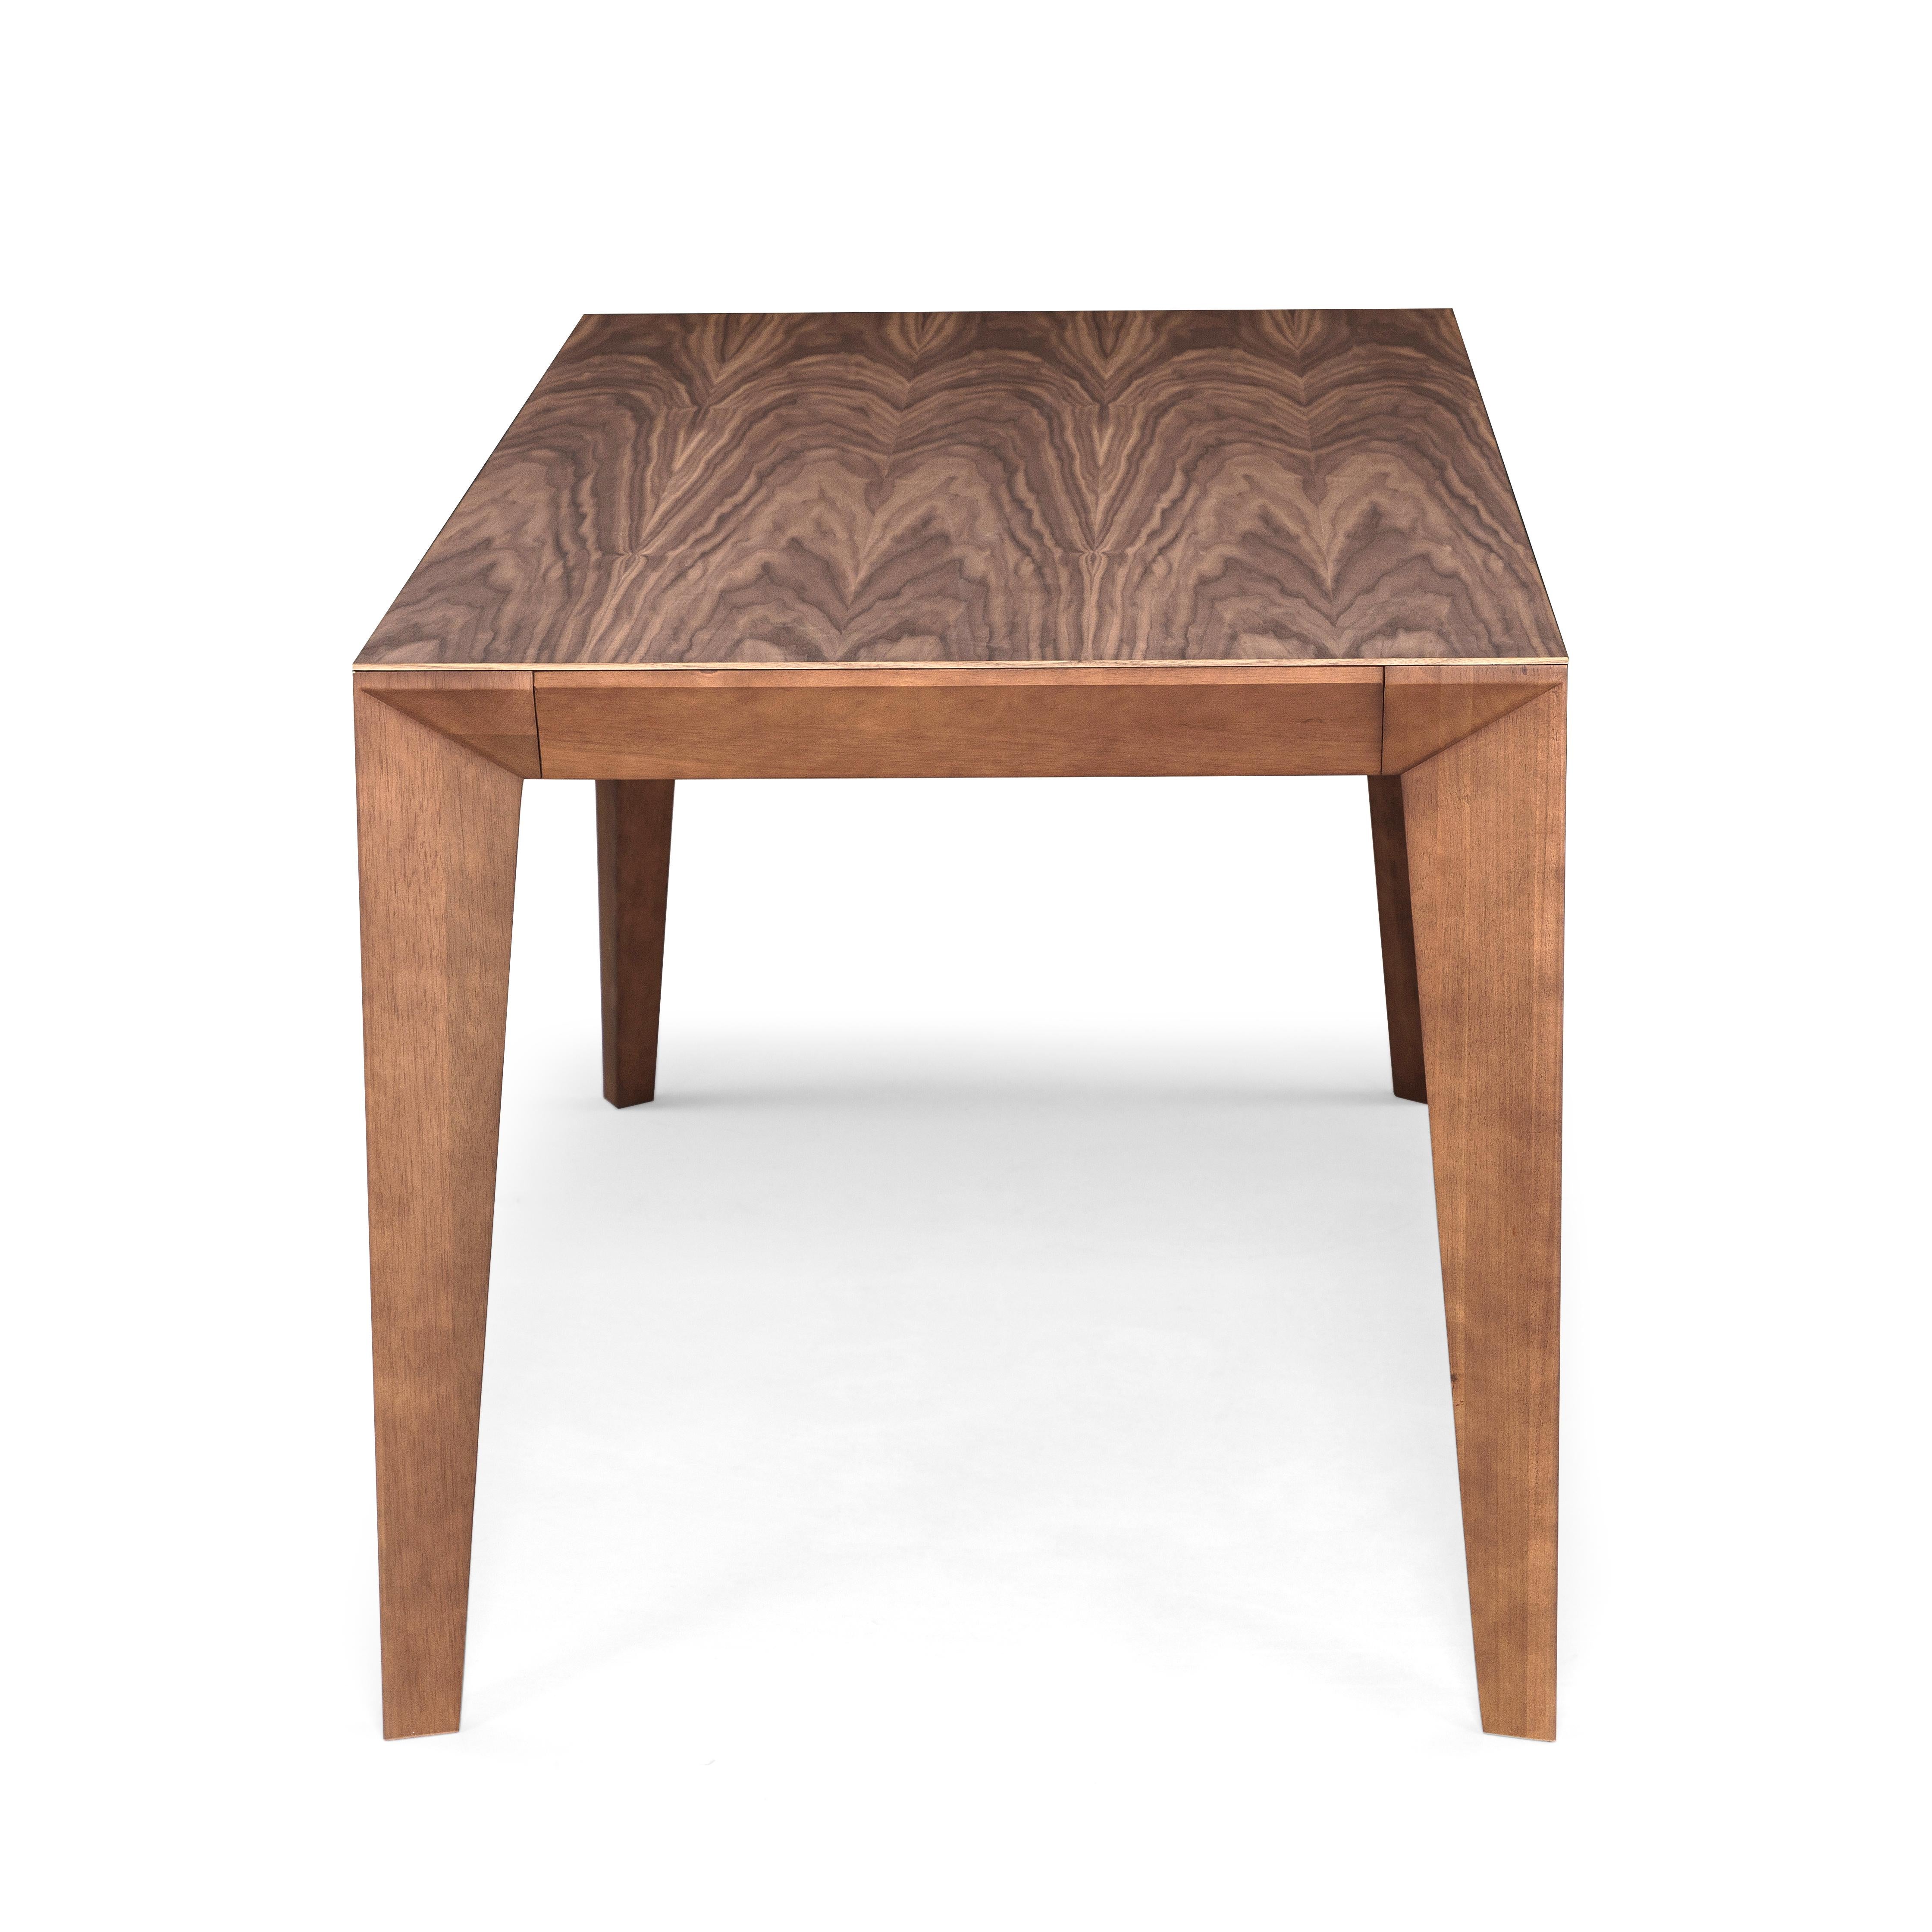 Hardwood Luce Rectangular Dining Table with a Walnut Wood Veneered Table Top 71'' For Sale